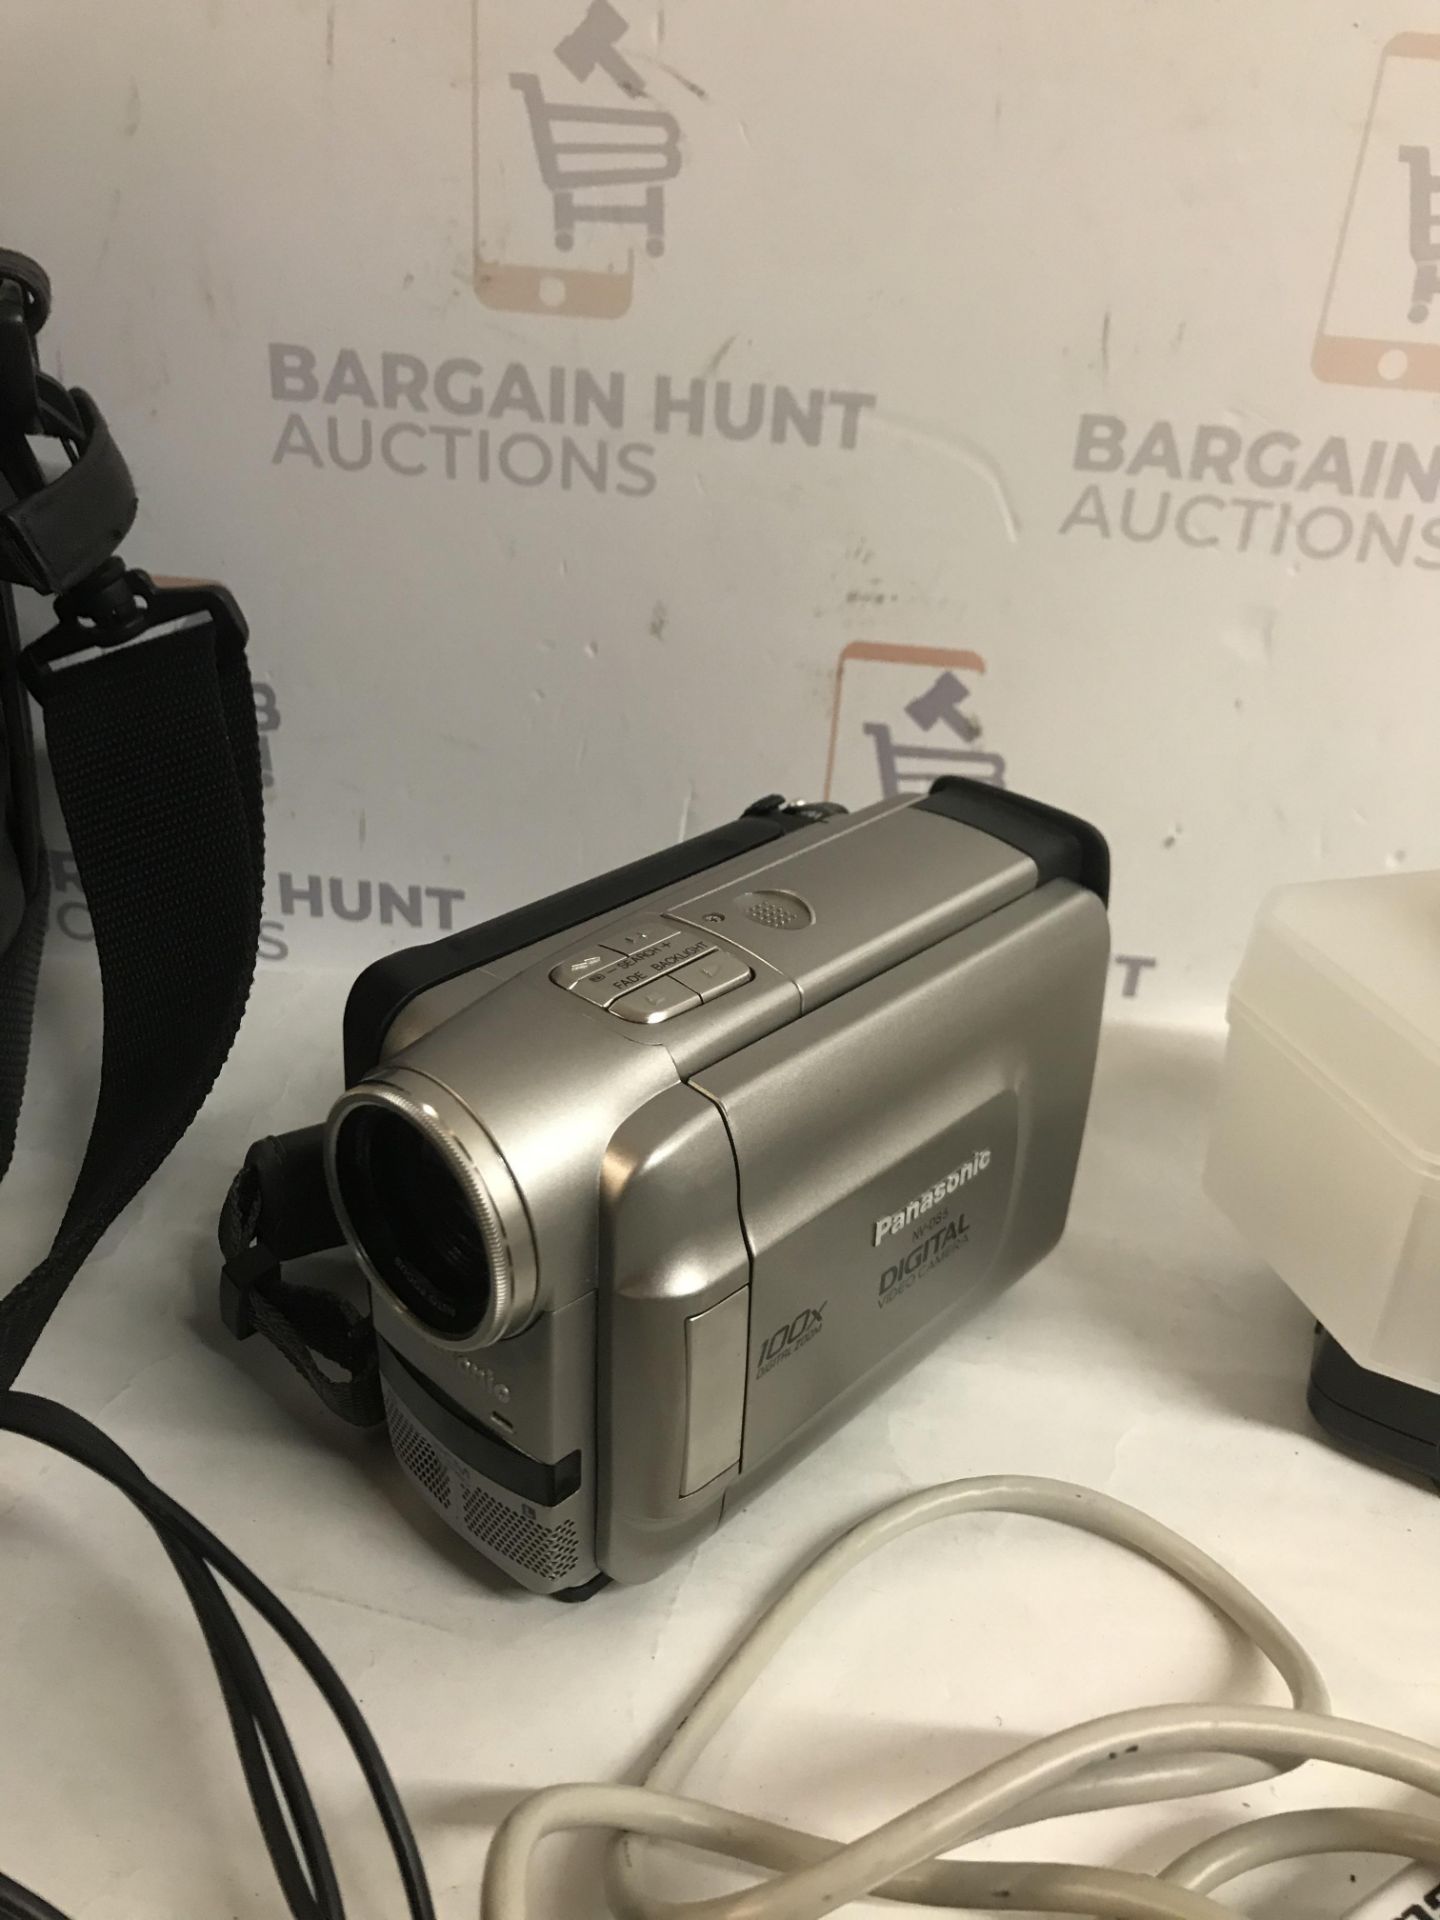 Vintage Rare Panasonic NV-DS5EN Video Camera with accessories (missing power cable) - Image 2 of 3